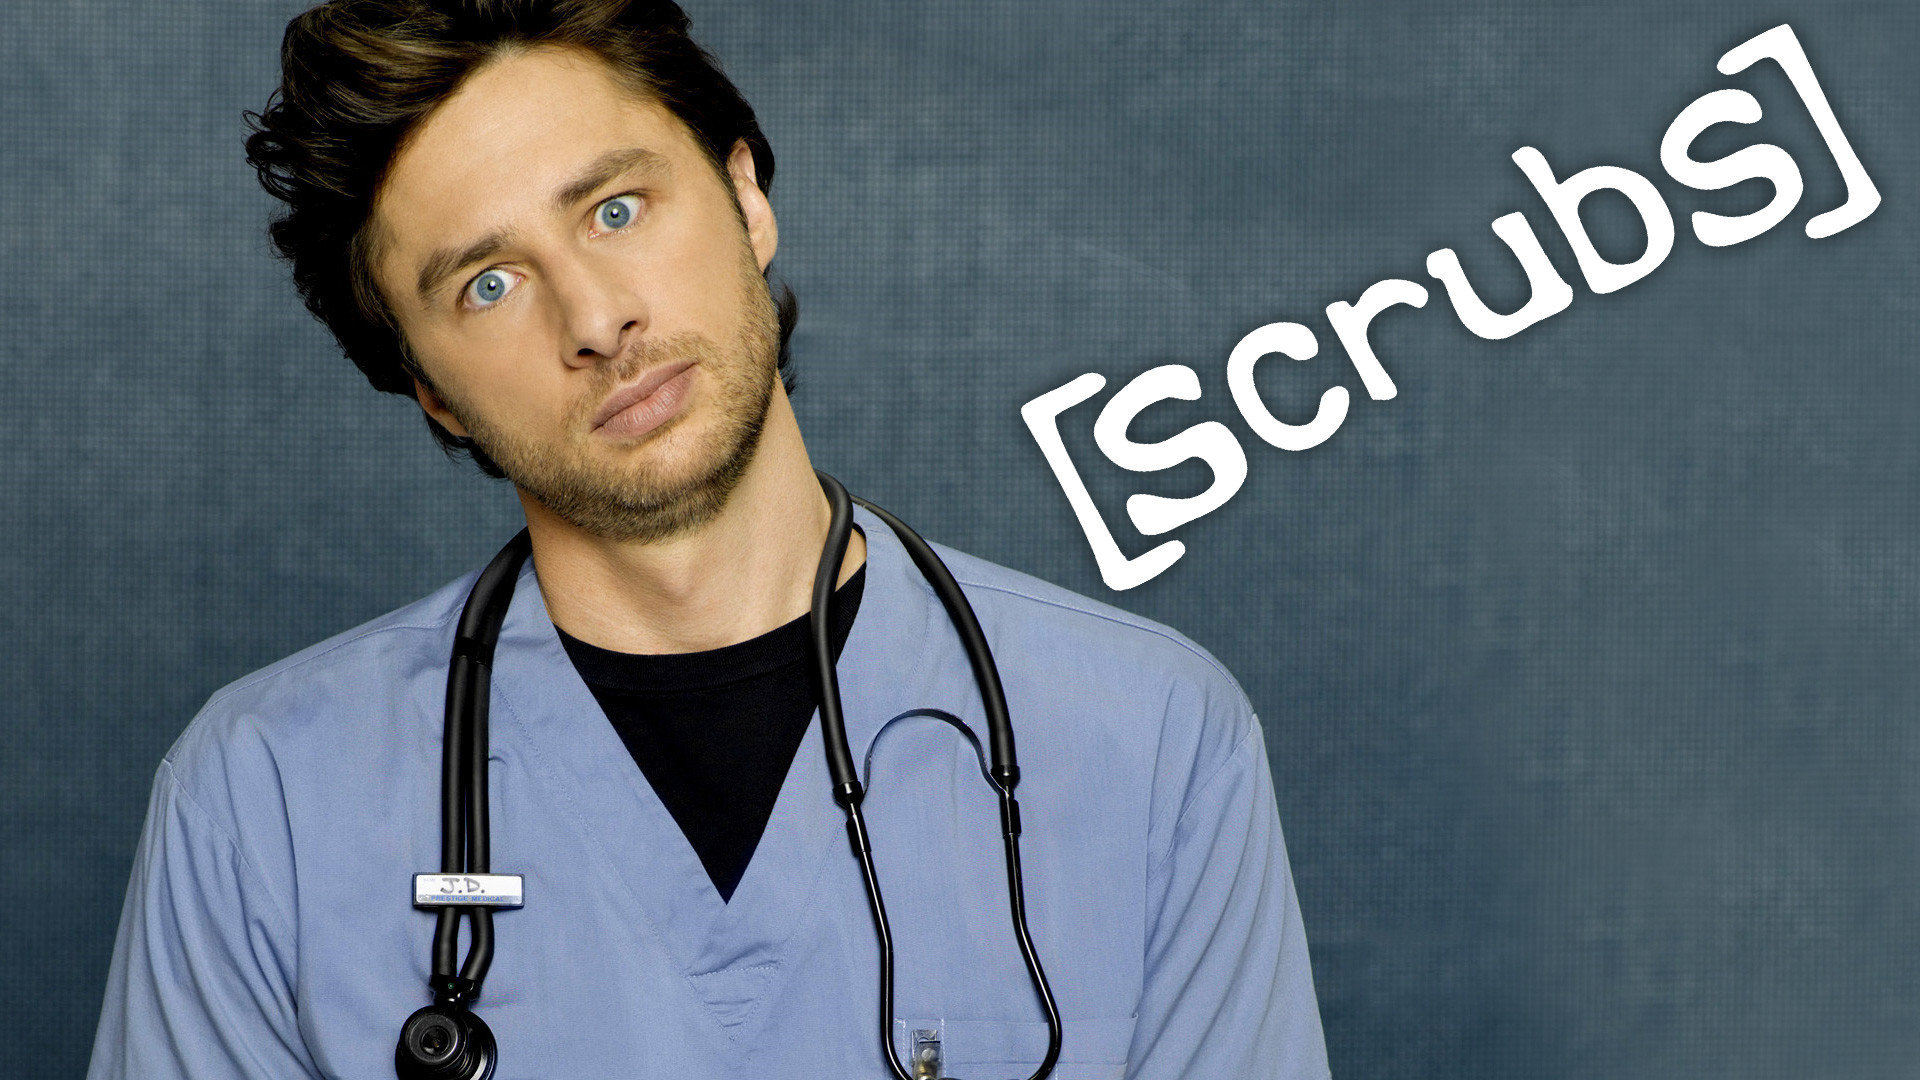 Download 1080p Scrubs PC background ID:84072 for free